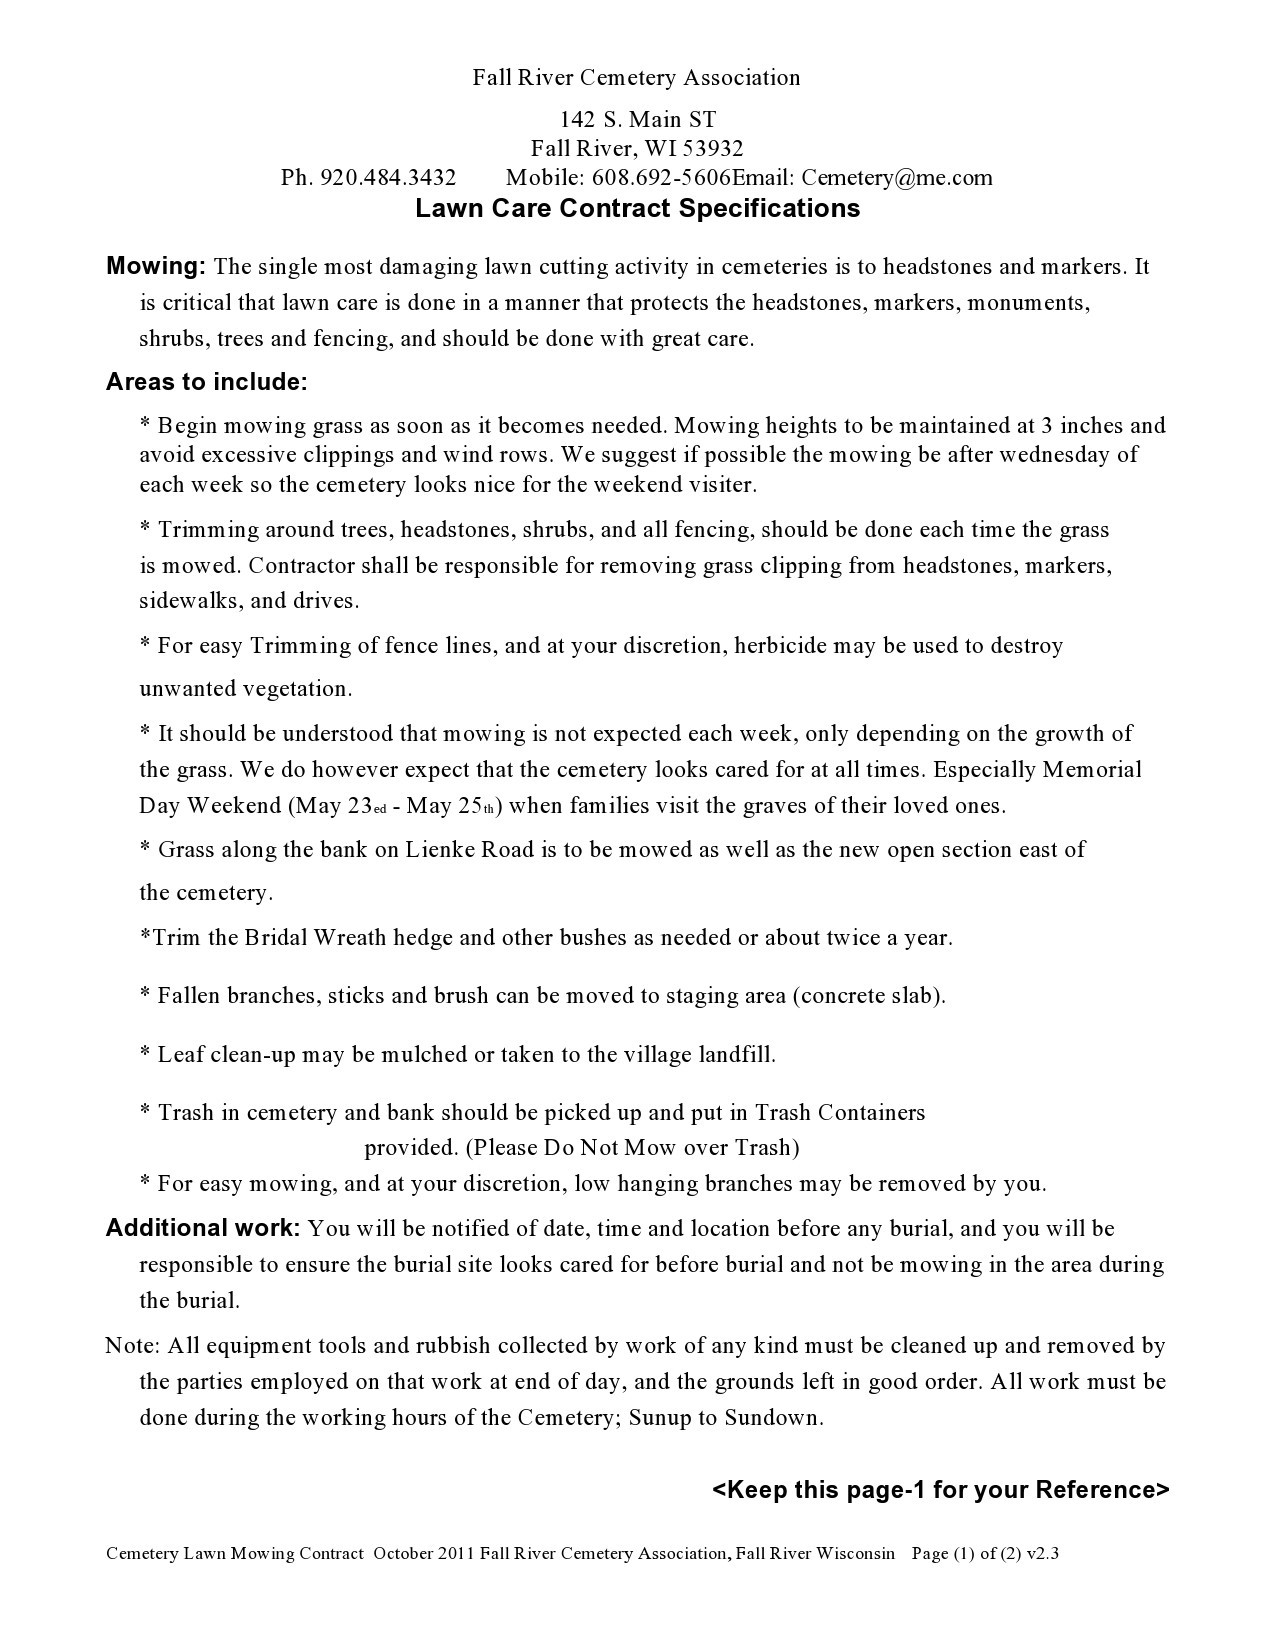 Free lawn care contract template 33